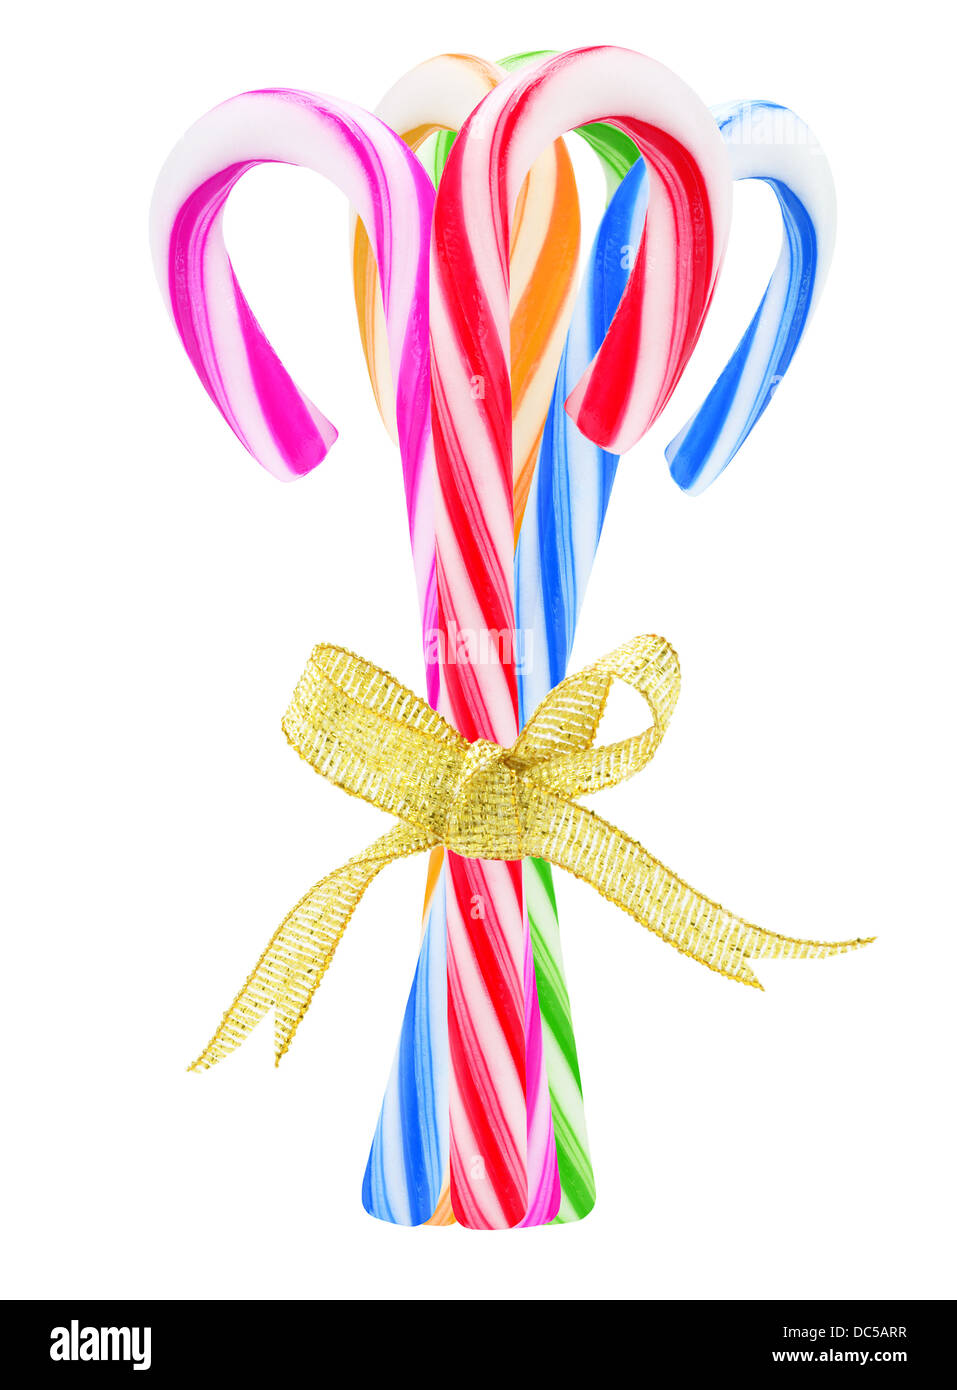 Bundle Of Colorful Candy Canes On White Background Stock Photo